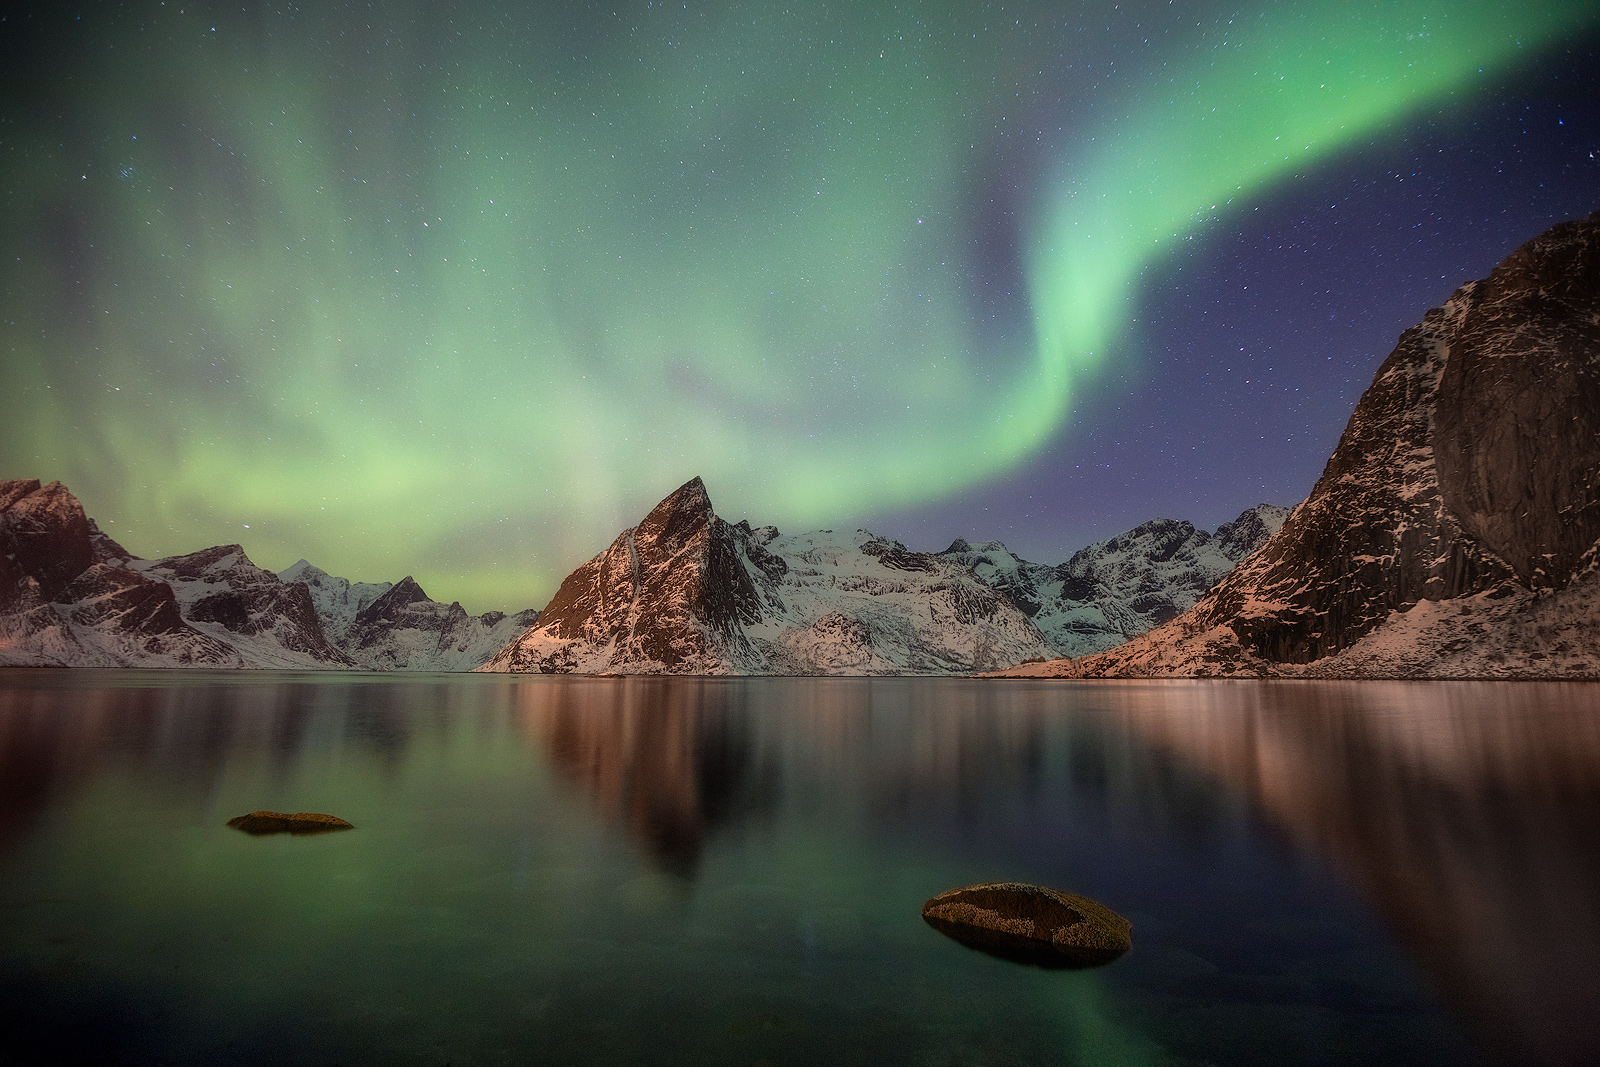 Northern lights on full display over Norway's fjords.